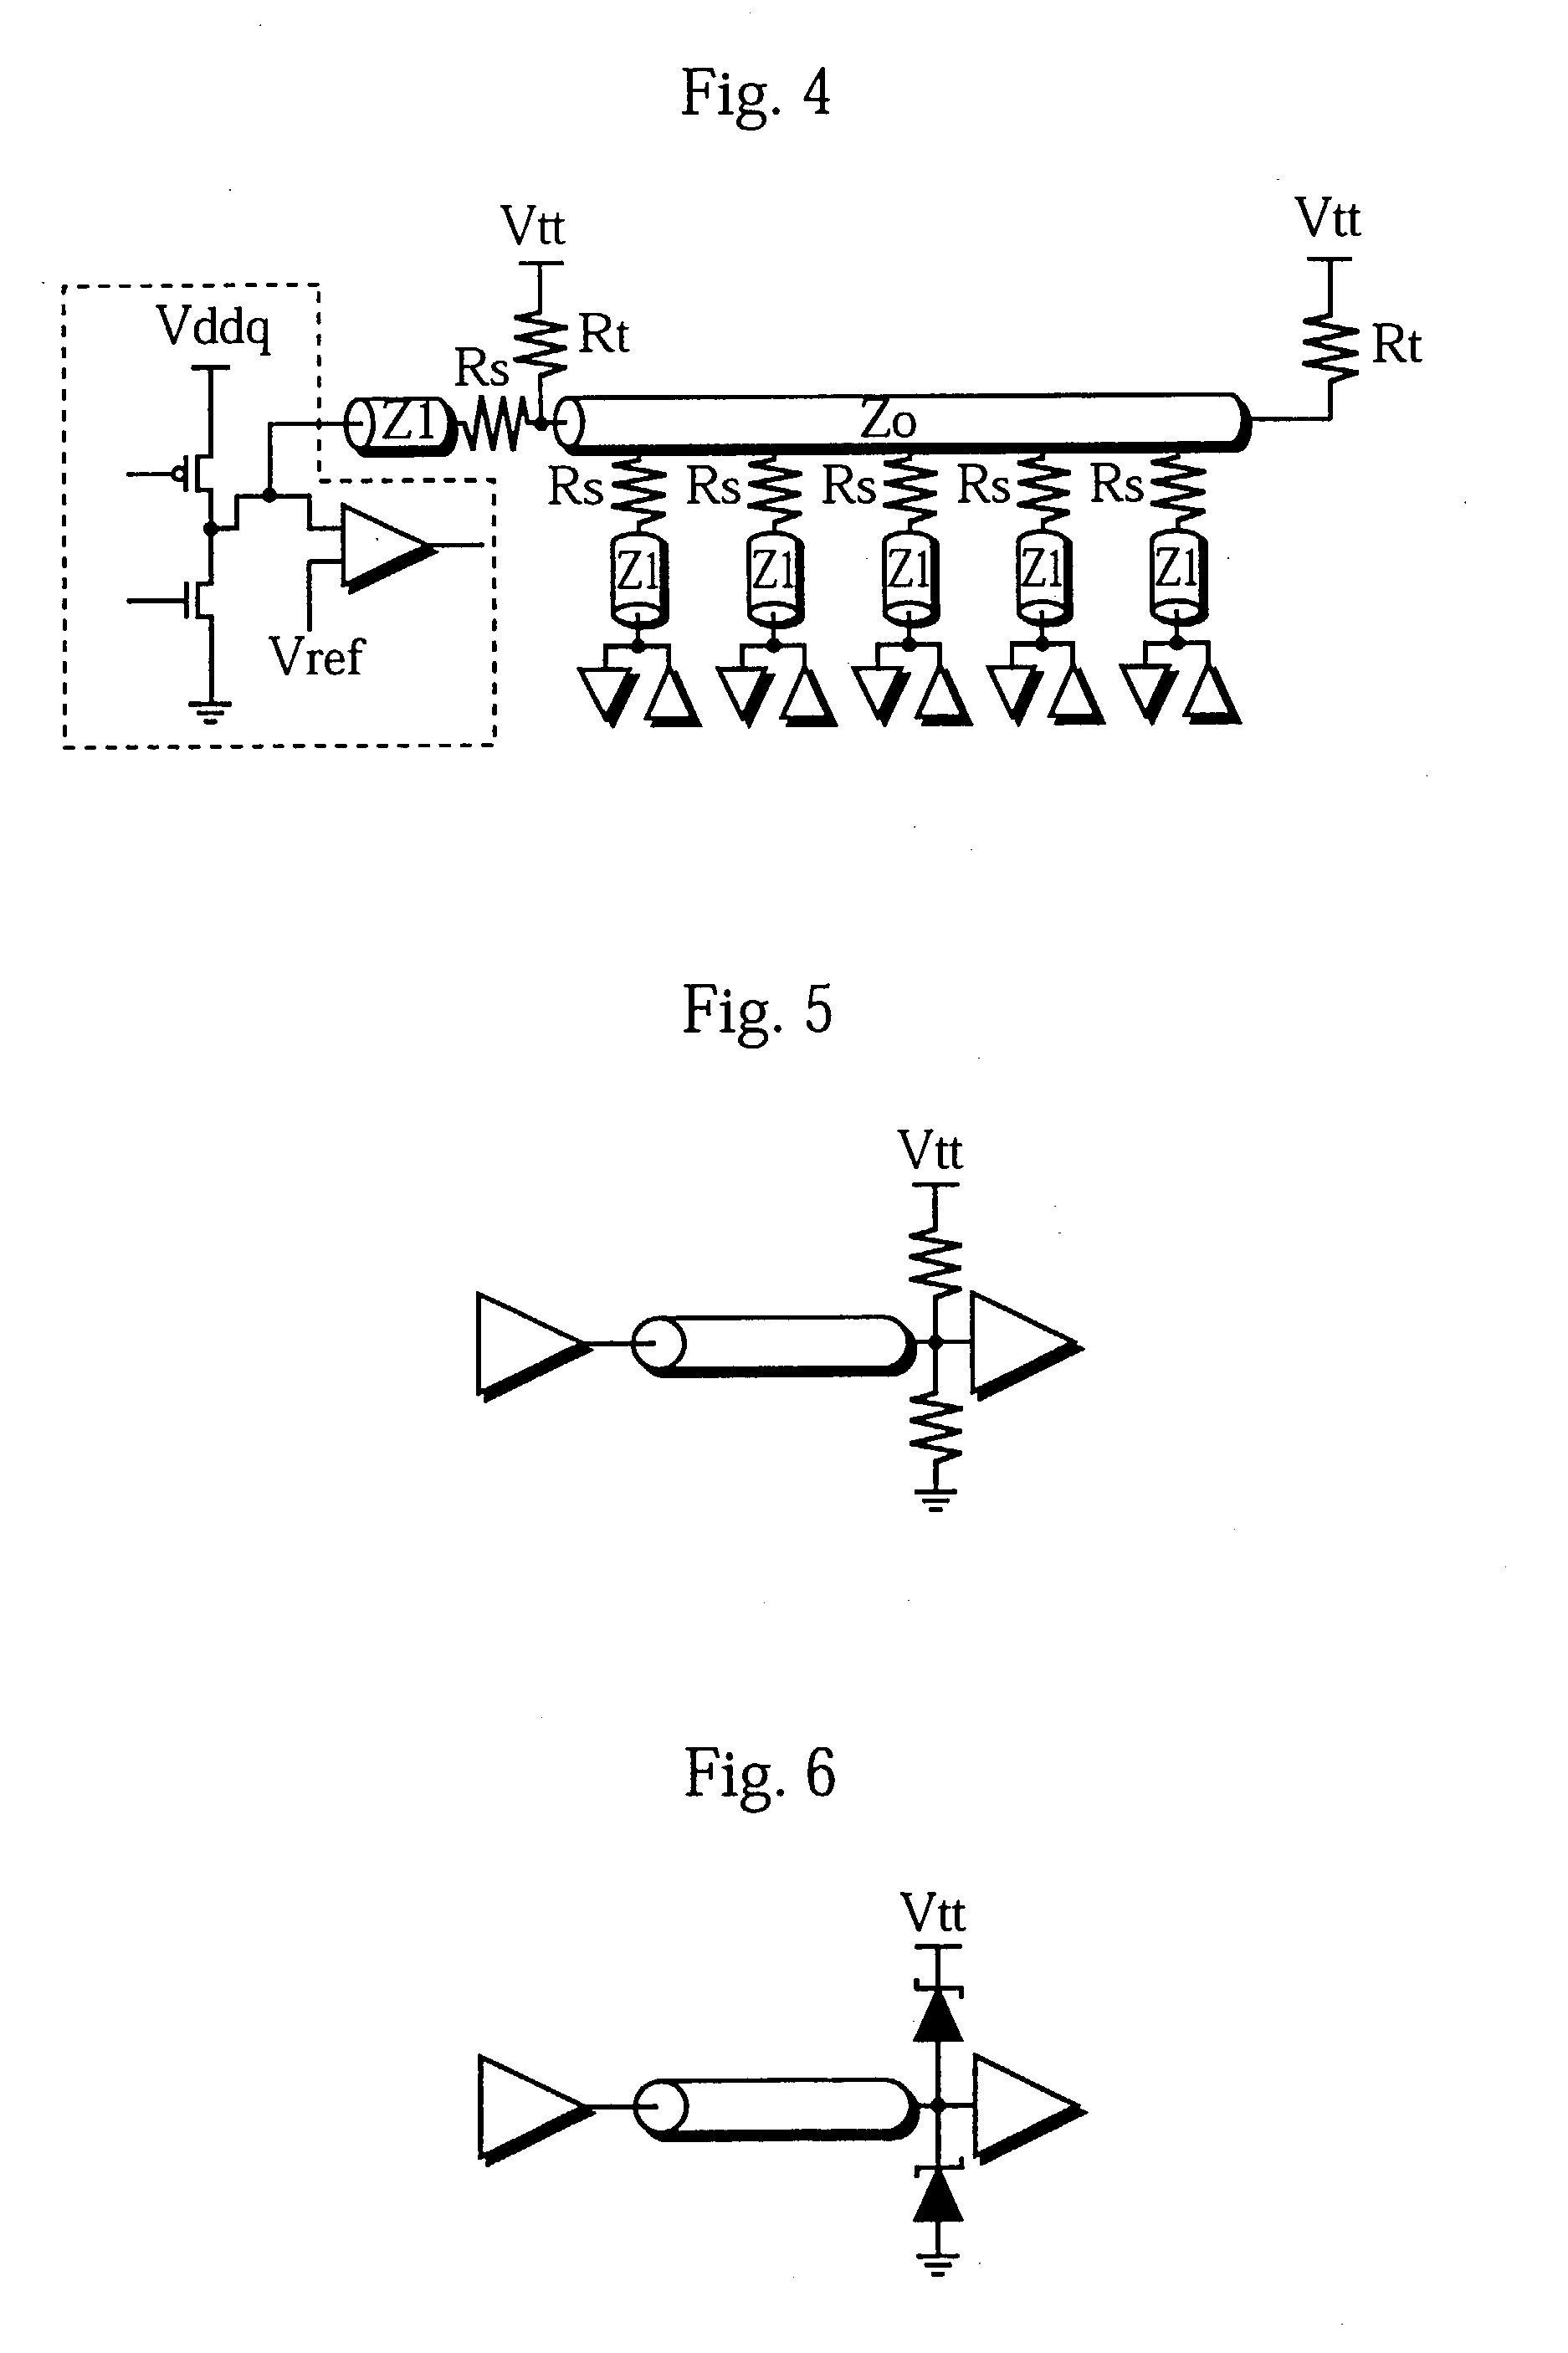 Bidirectional signal transmission circuit and bus system